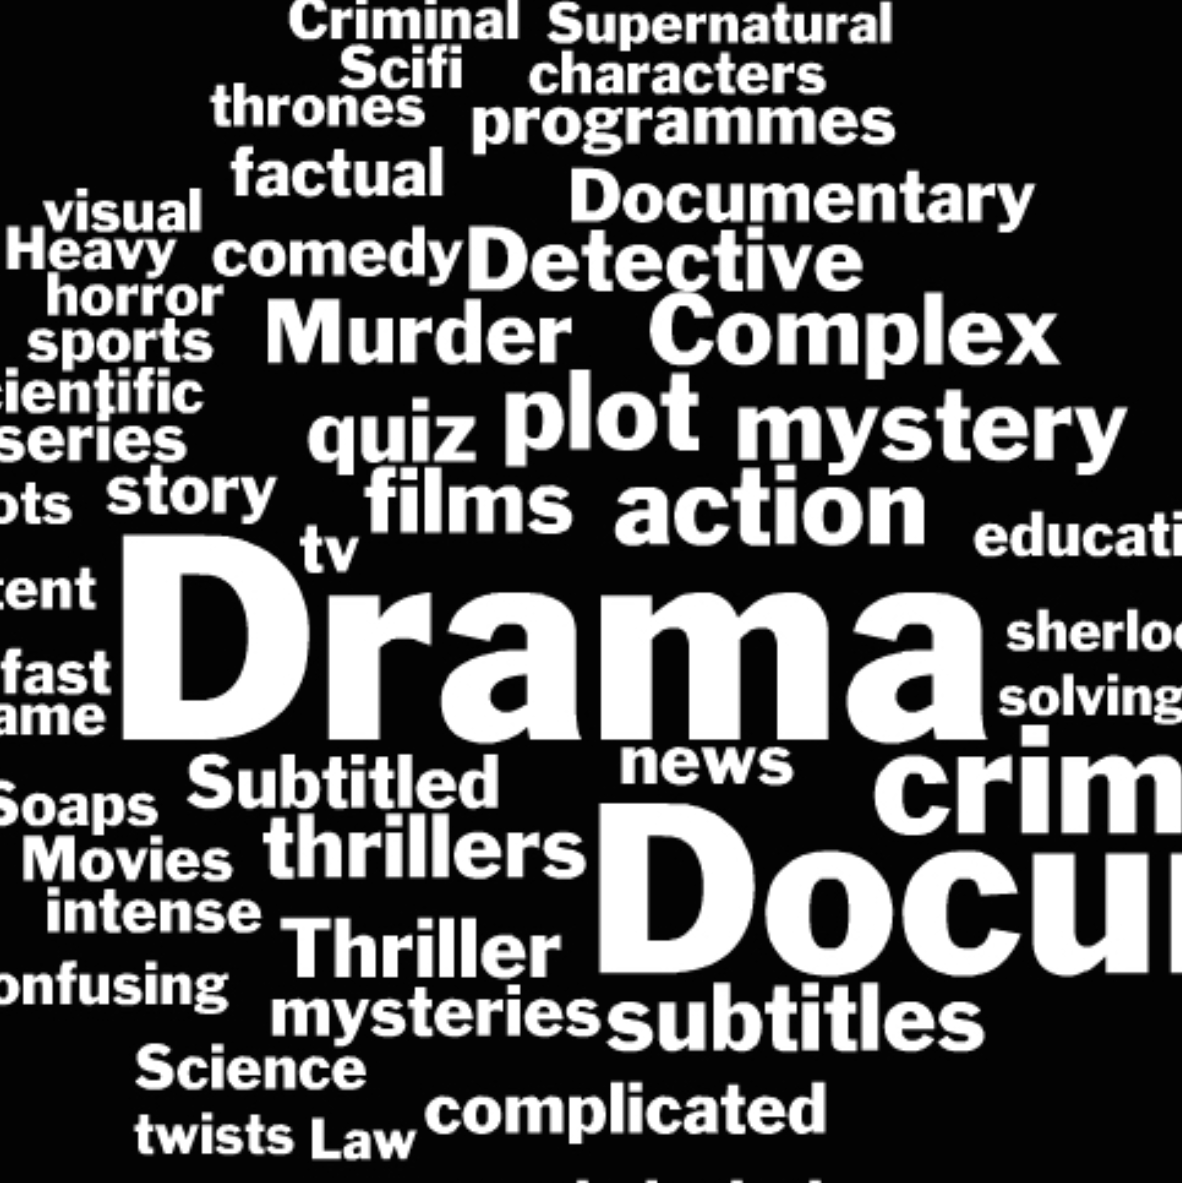 Wordcloud of a number of terms related to what makes second screening challening. Large words include 'Drama' and 'Documentaries